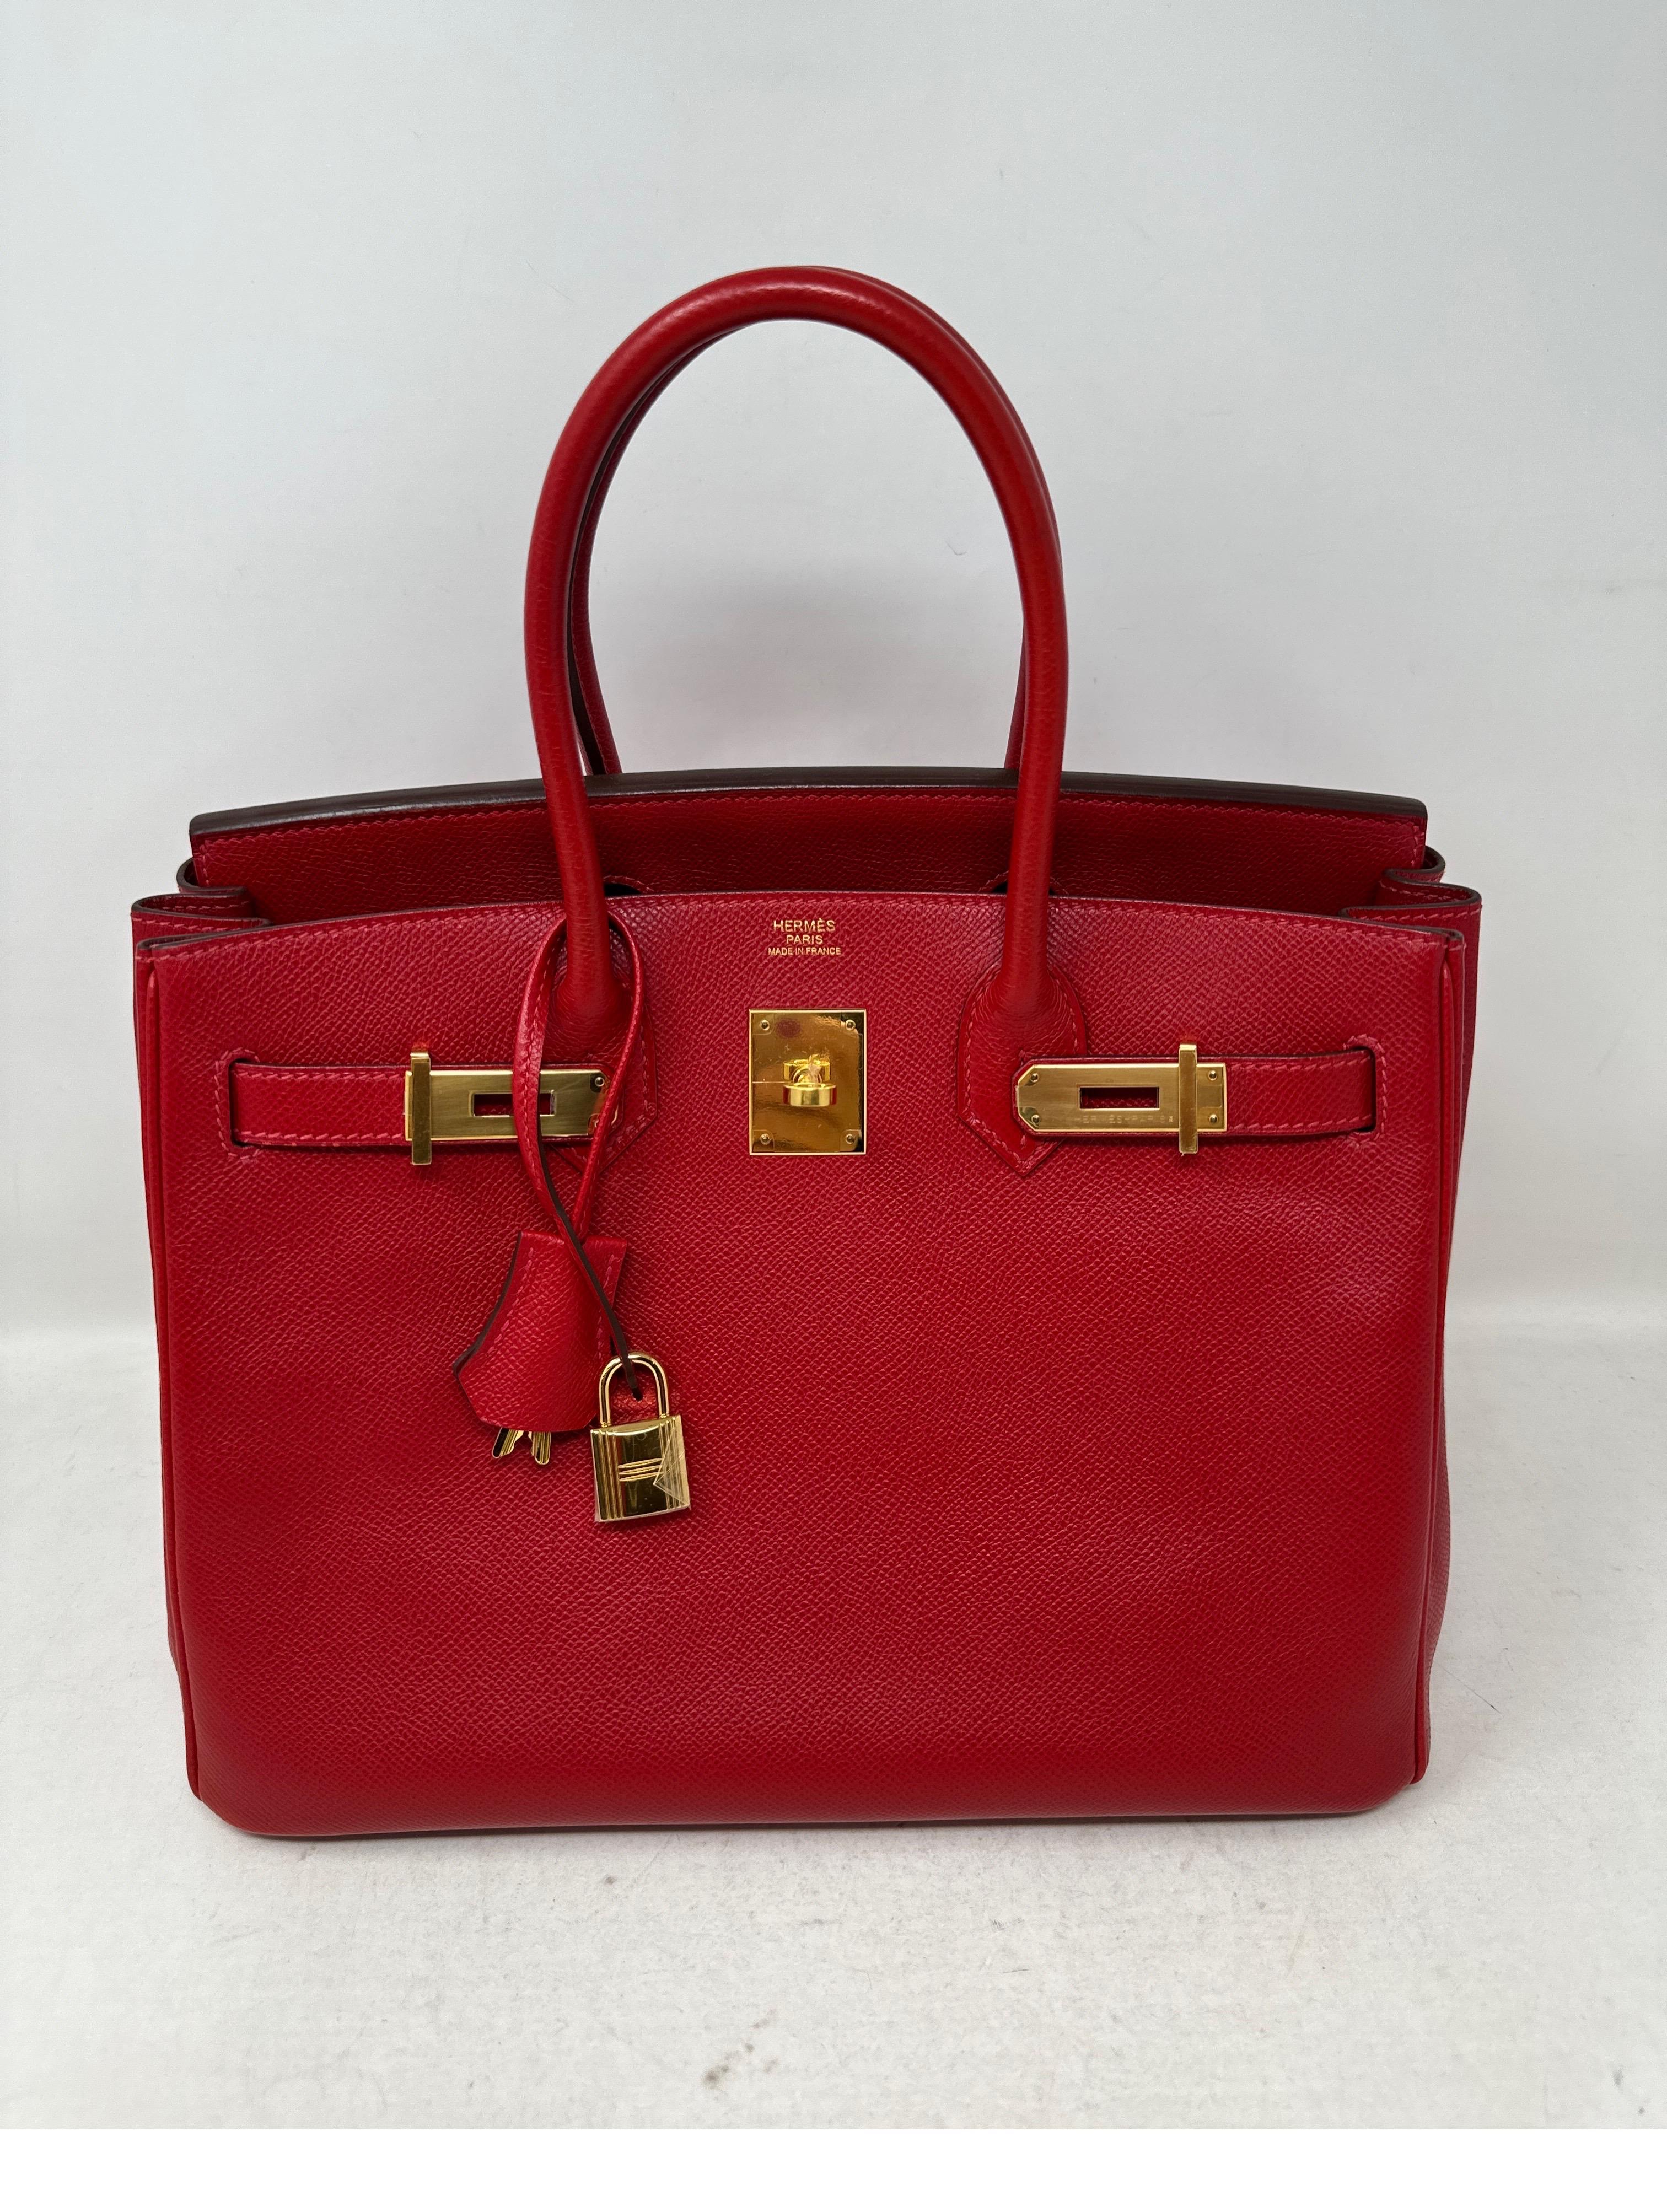 Hermes Rouge Casaque Birkin 30 Bag. The most wanted red color by Hermes. Red is beautiful. Gold hardware. Good condition. Epsom leather. Includes clochette, lock, keys, and dust bag. Guaranteed authentic. 